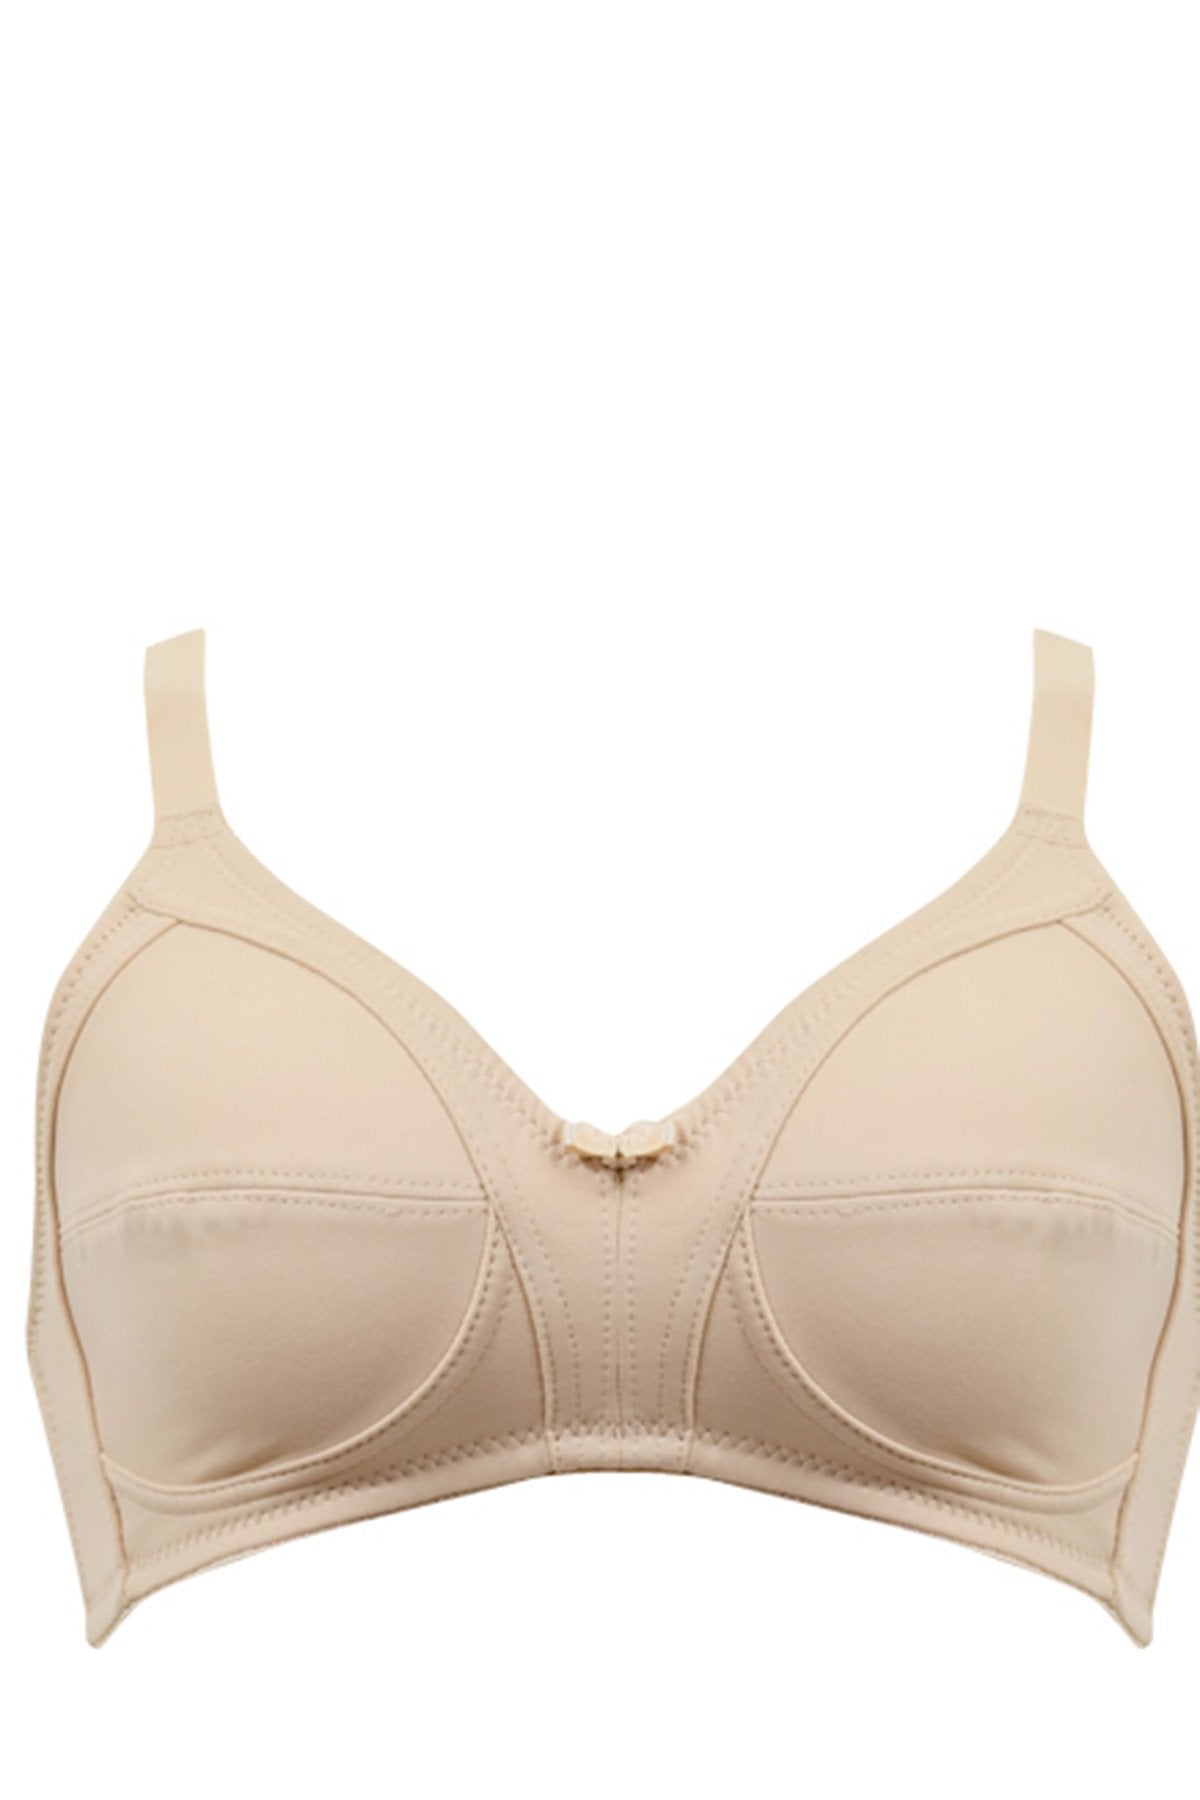 BLS - Cansu Non Wired And Non Padded Cotton Bra - Skin – Makeup